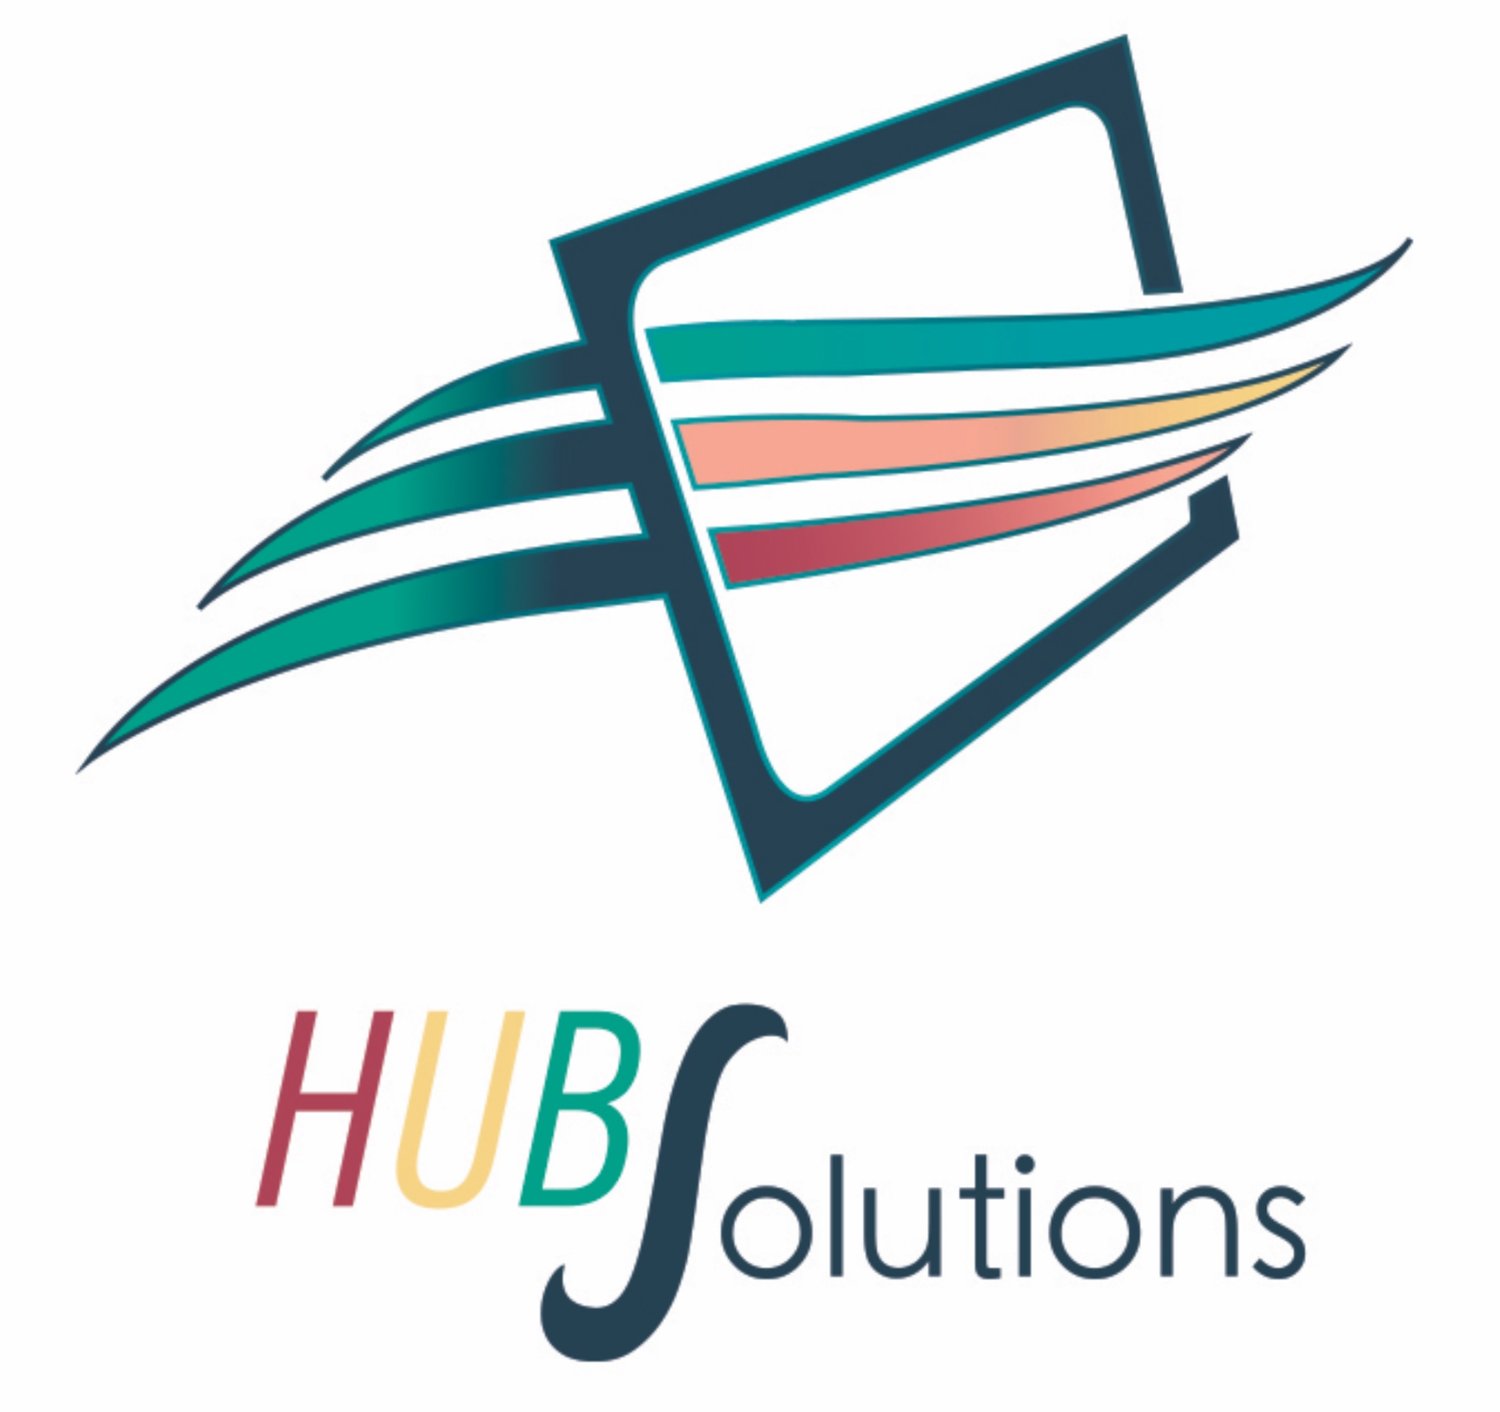 HUBSolutions Company Site